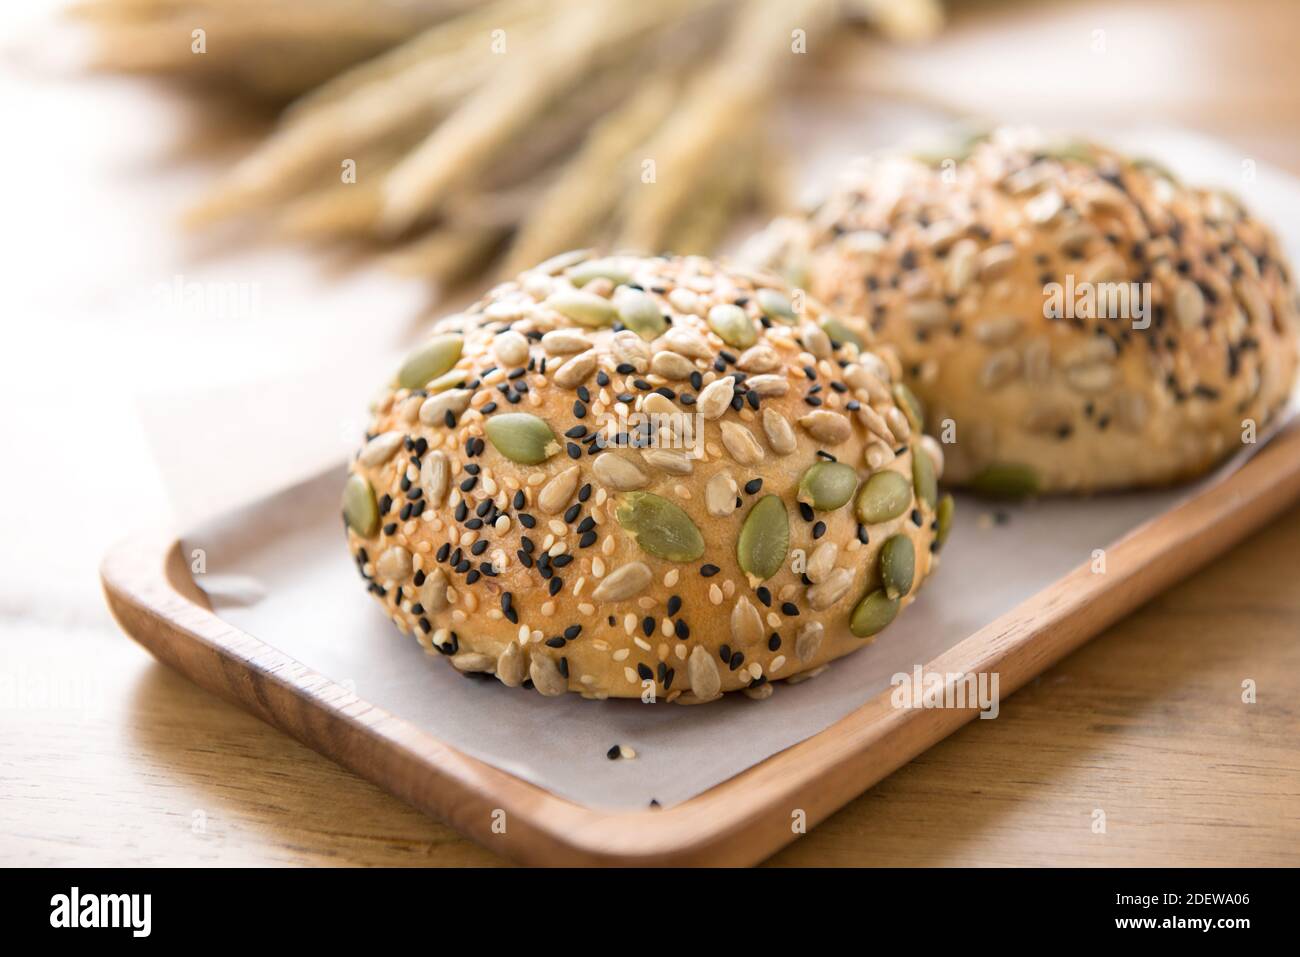 Multigrain mixed cereal seed healthy bread bun in wooden plate displaying on the table Stock Photo